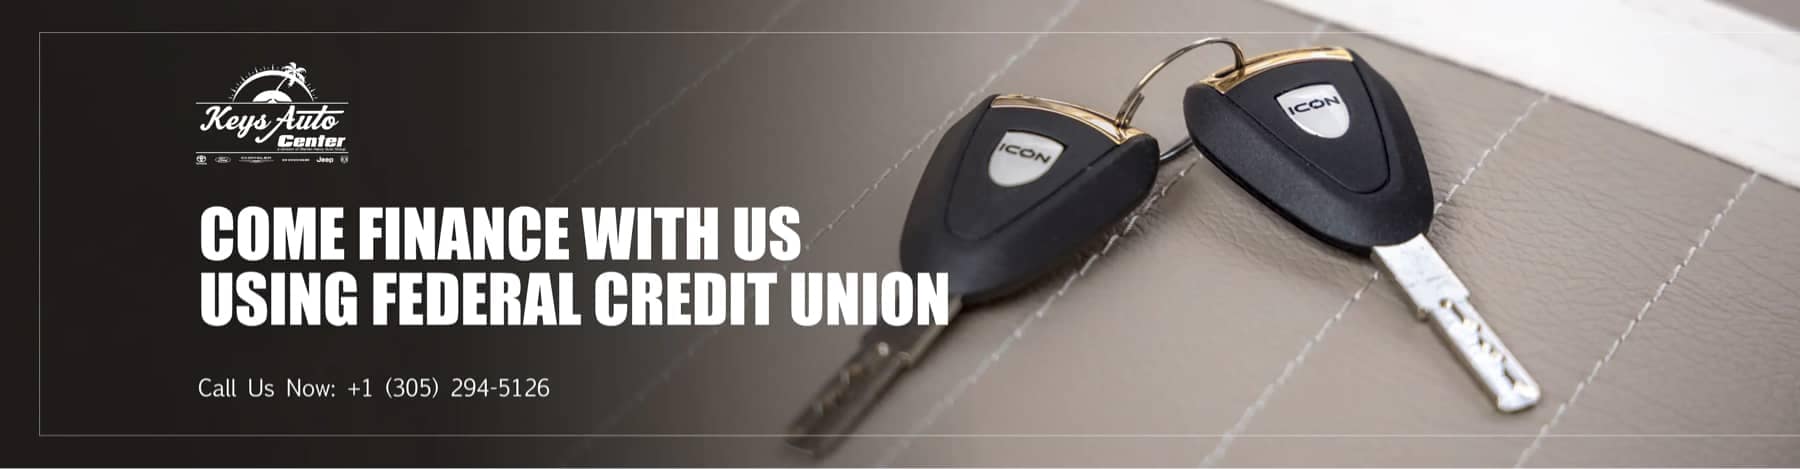 come finance with us using Federal Credit Union